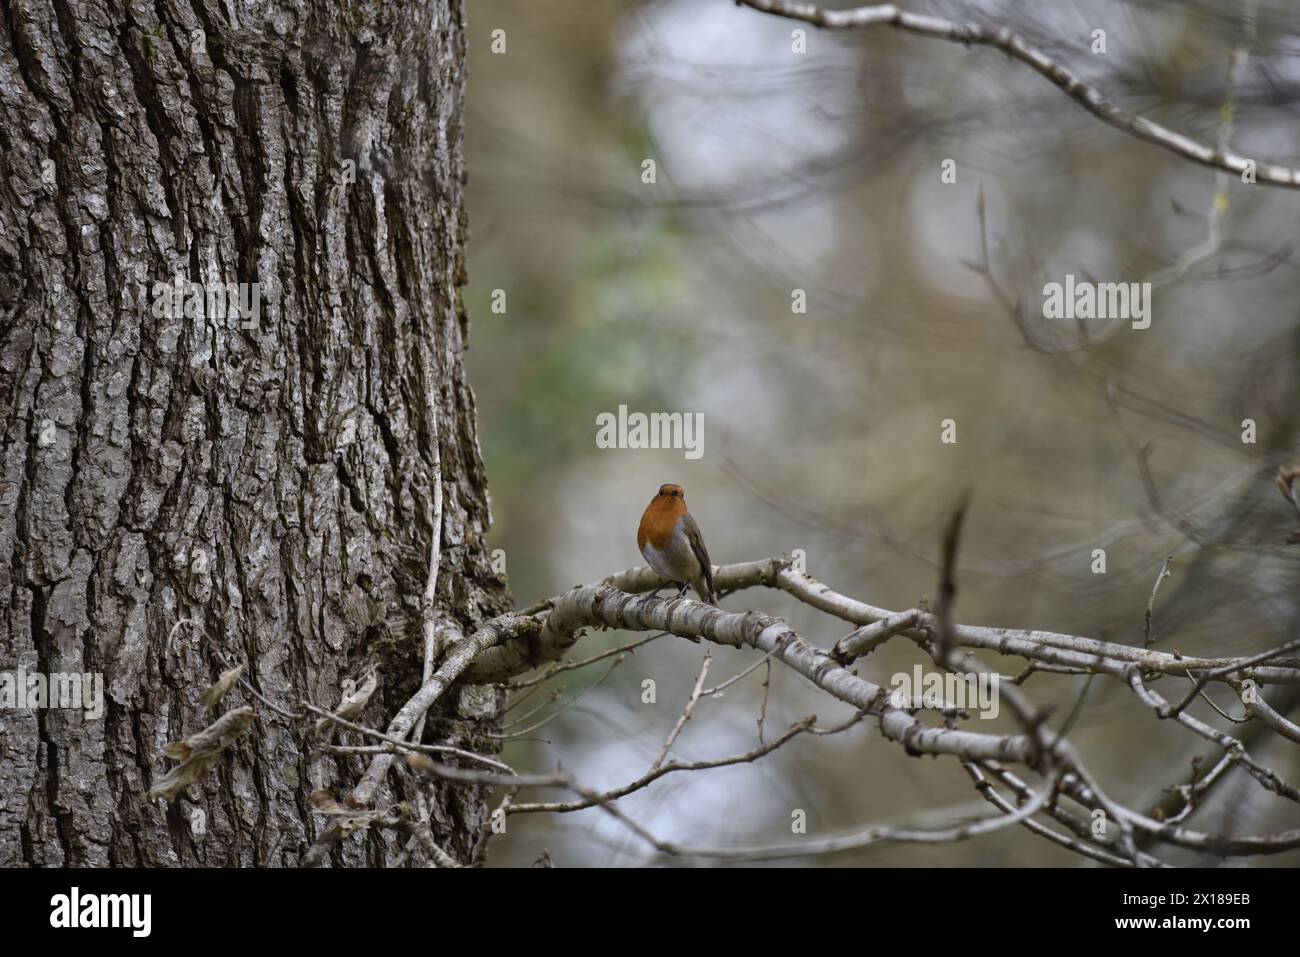 European Robin (Erithacus rubecula) Facing Camera From Branches Near Bottom of Image, with Tree Trunk to Left, against a Bokeh Woodland Background, UK Stock Photo